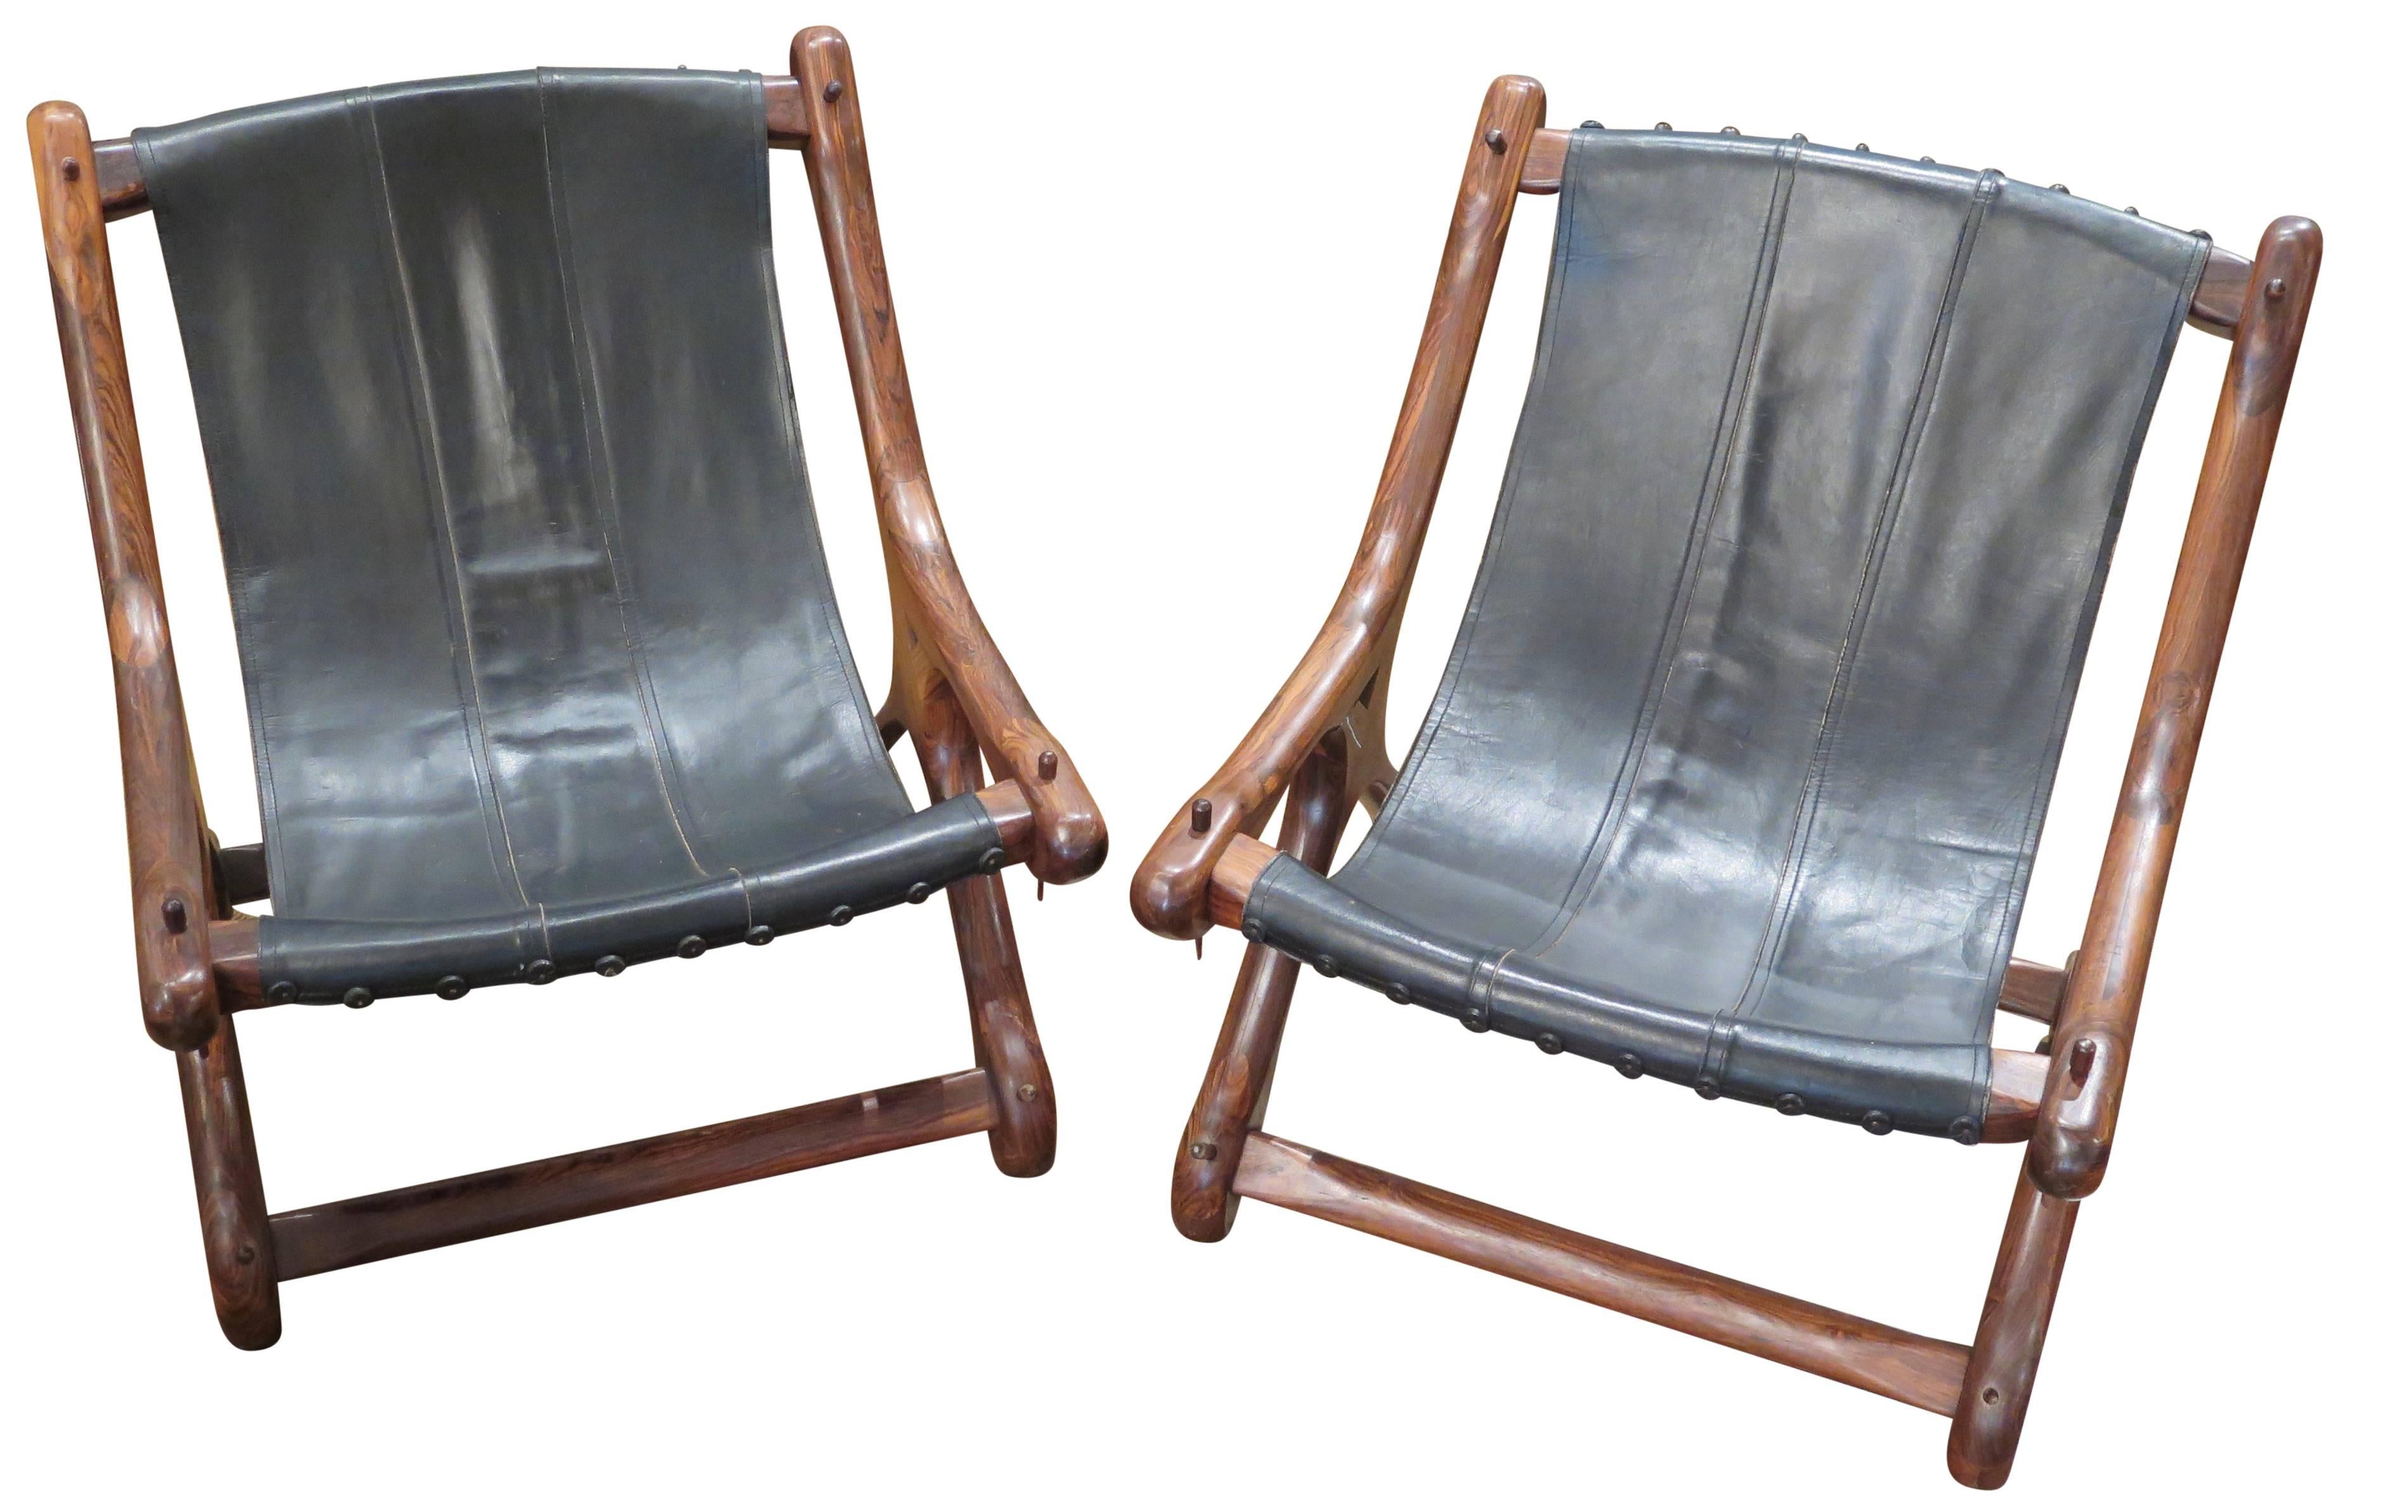 Beautiful pair of Don Shoemaker sling chairs, circa 1960. They have the Shoemaker sticker from 